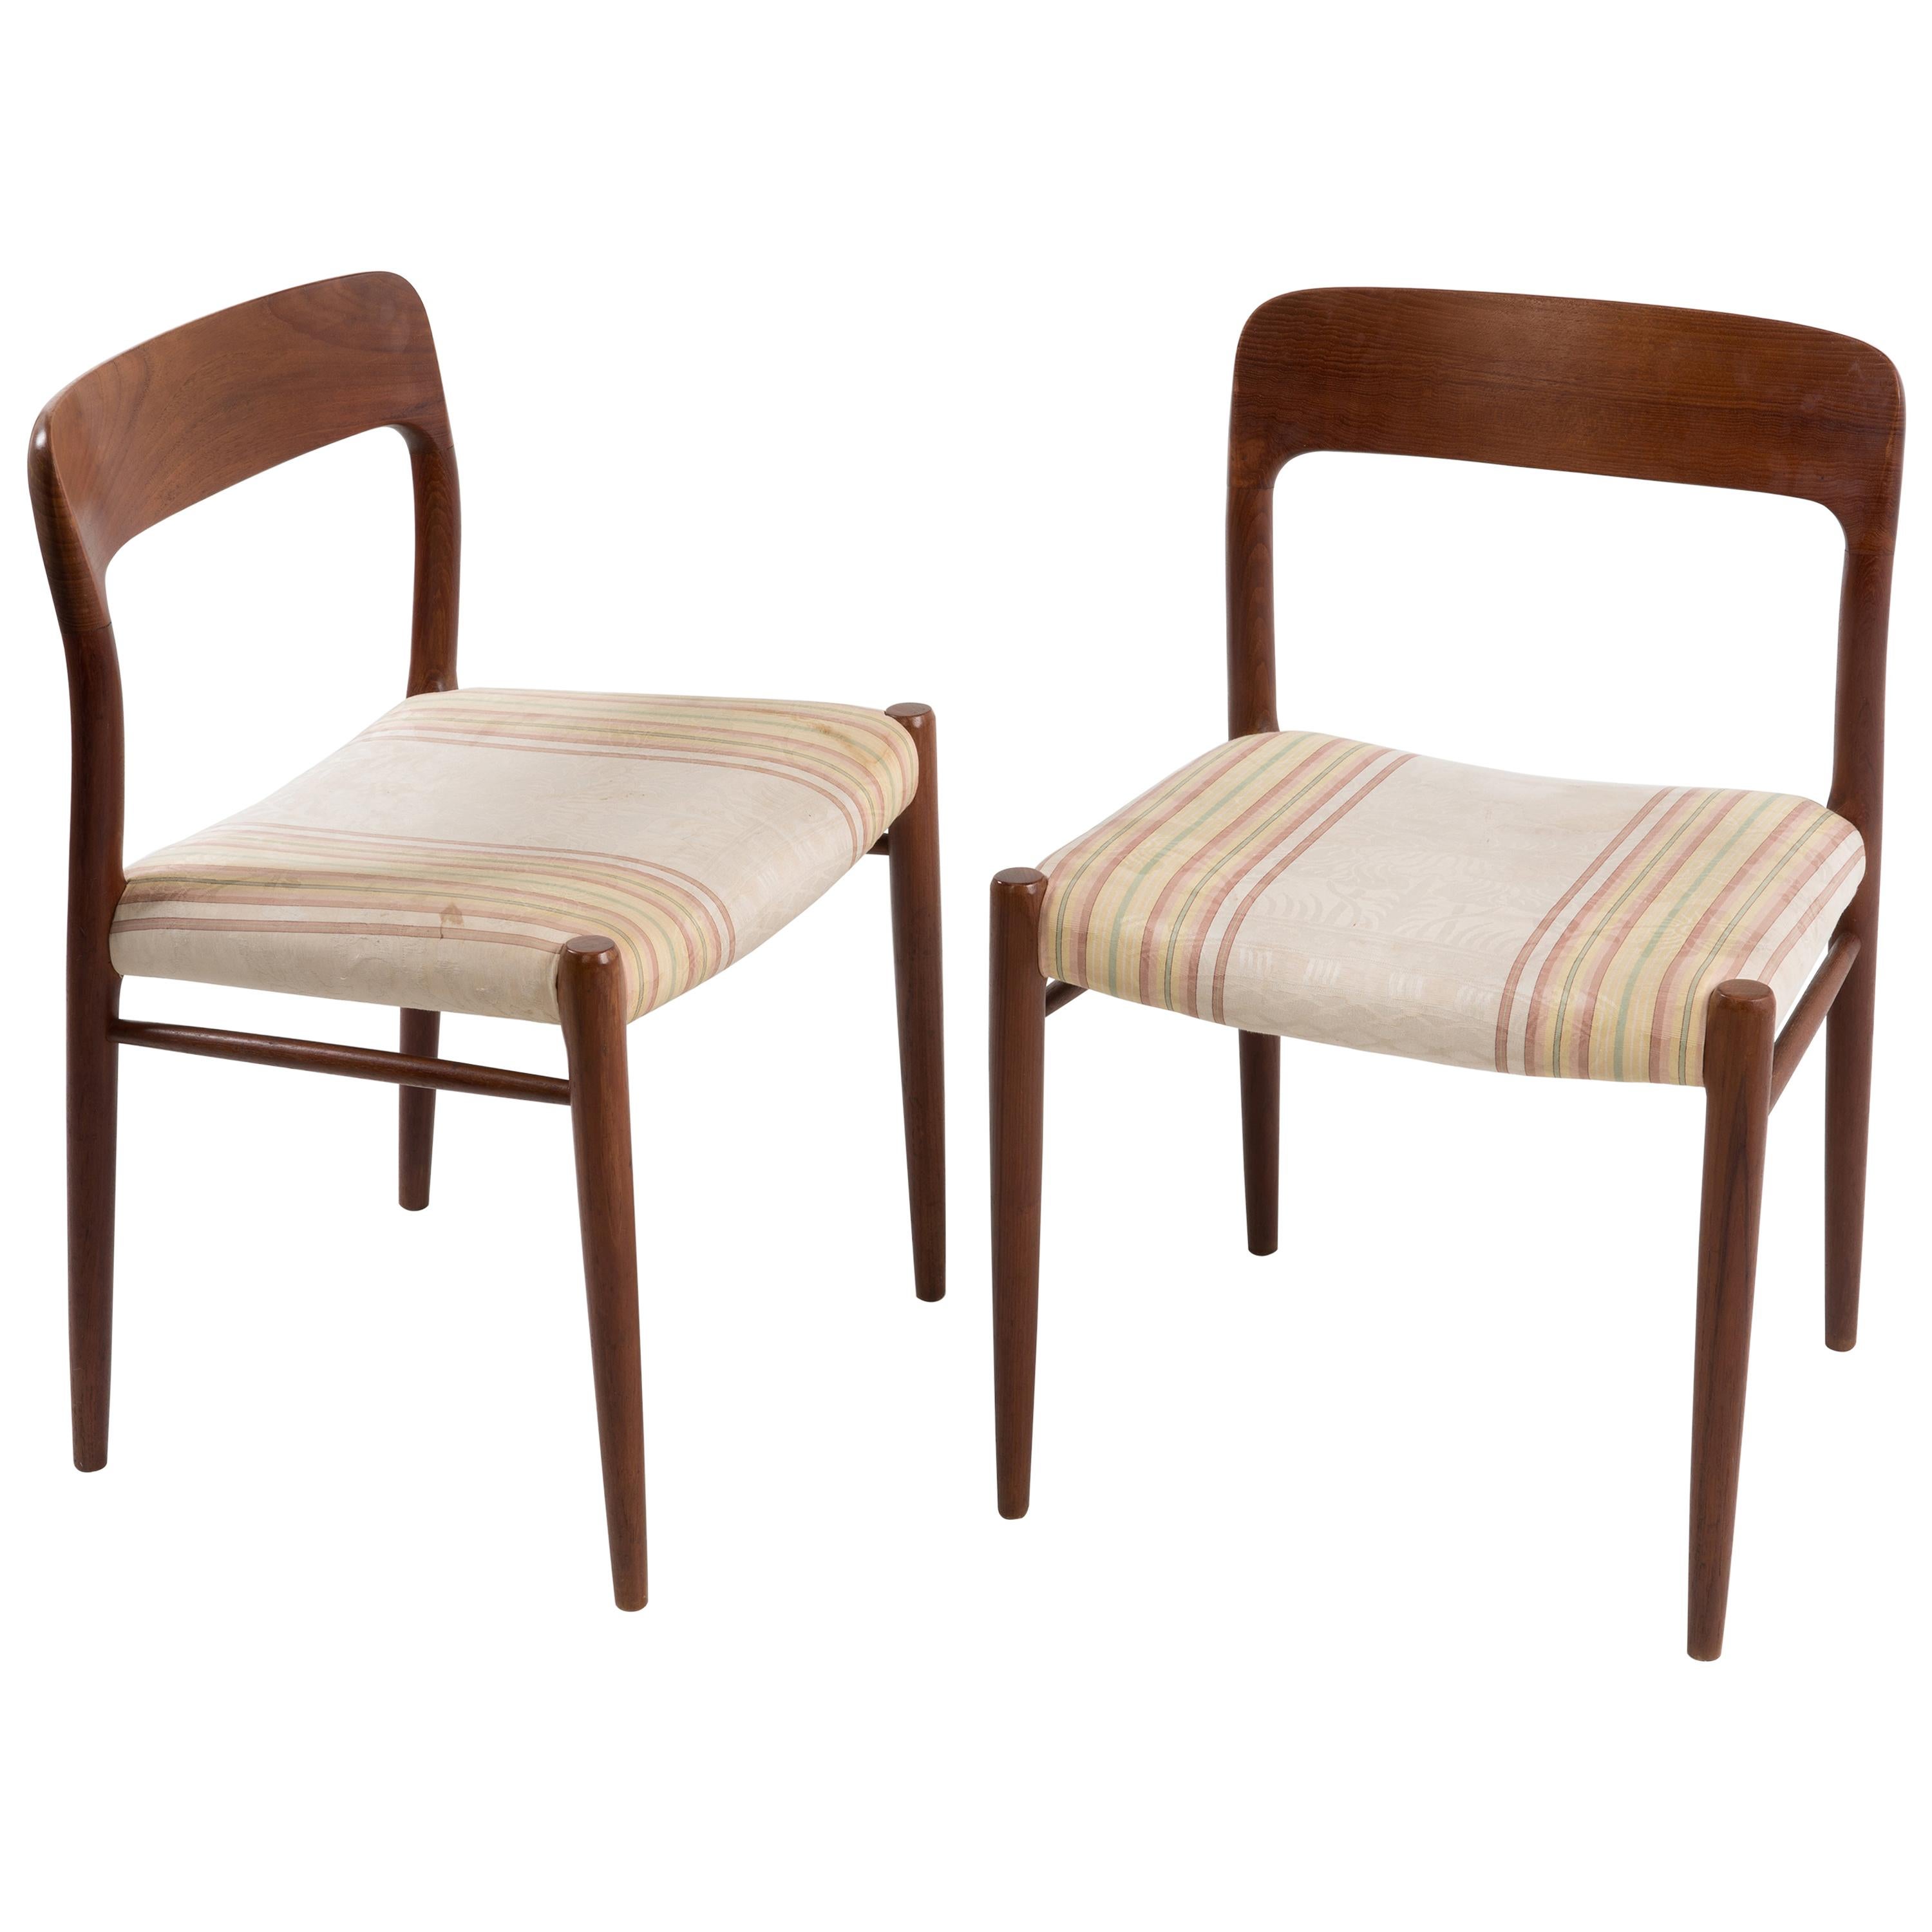 Niels Möller for J.L. Möllers Style Modell 75 Danish Teak Dining Chairs, Pair